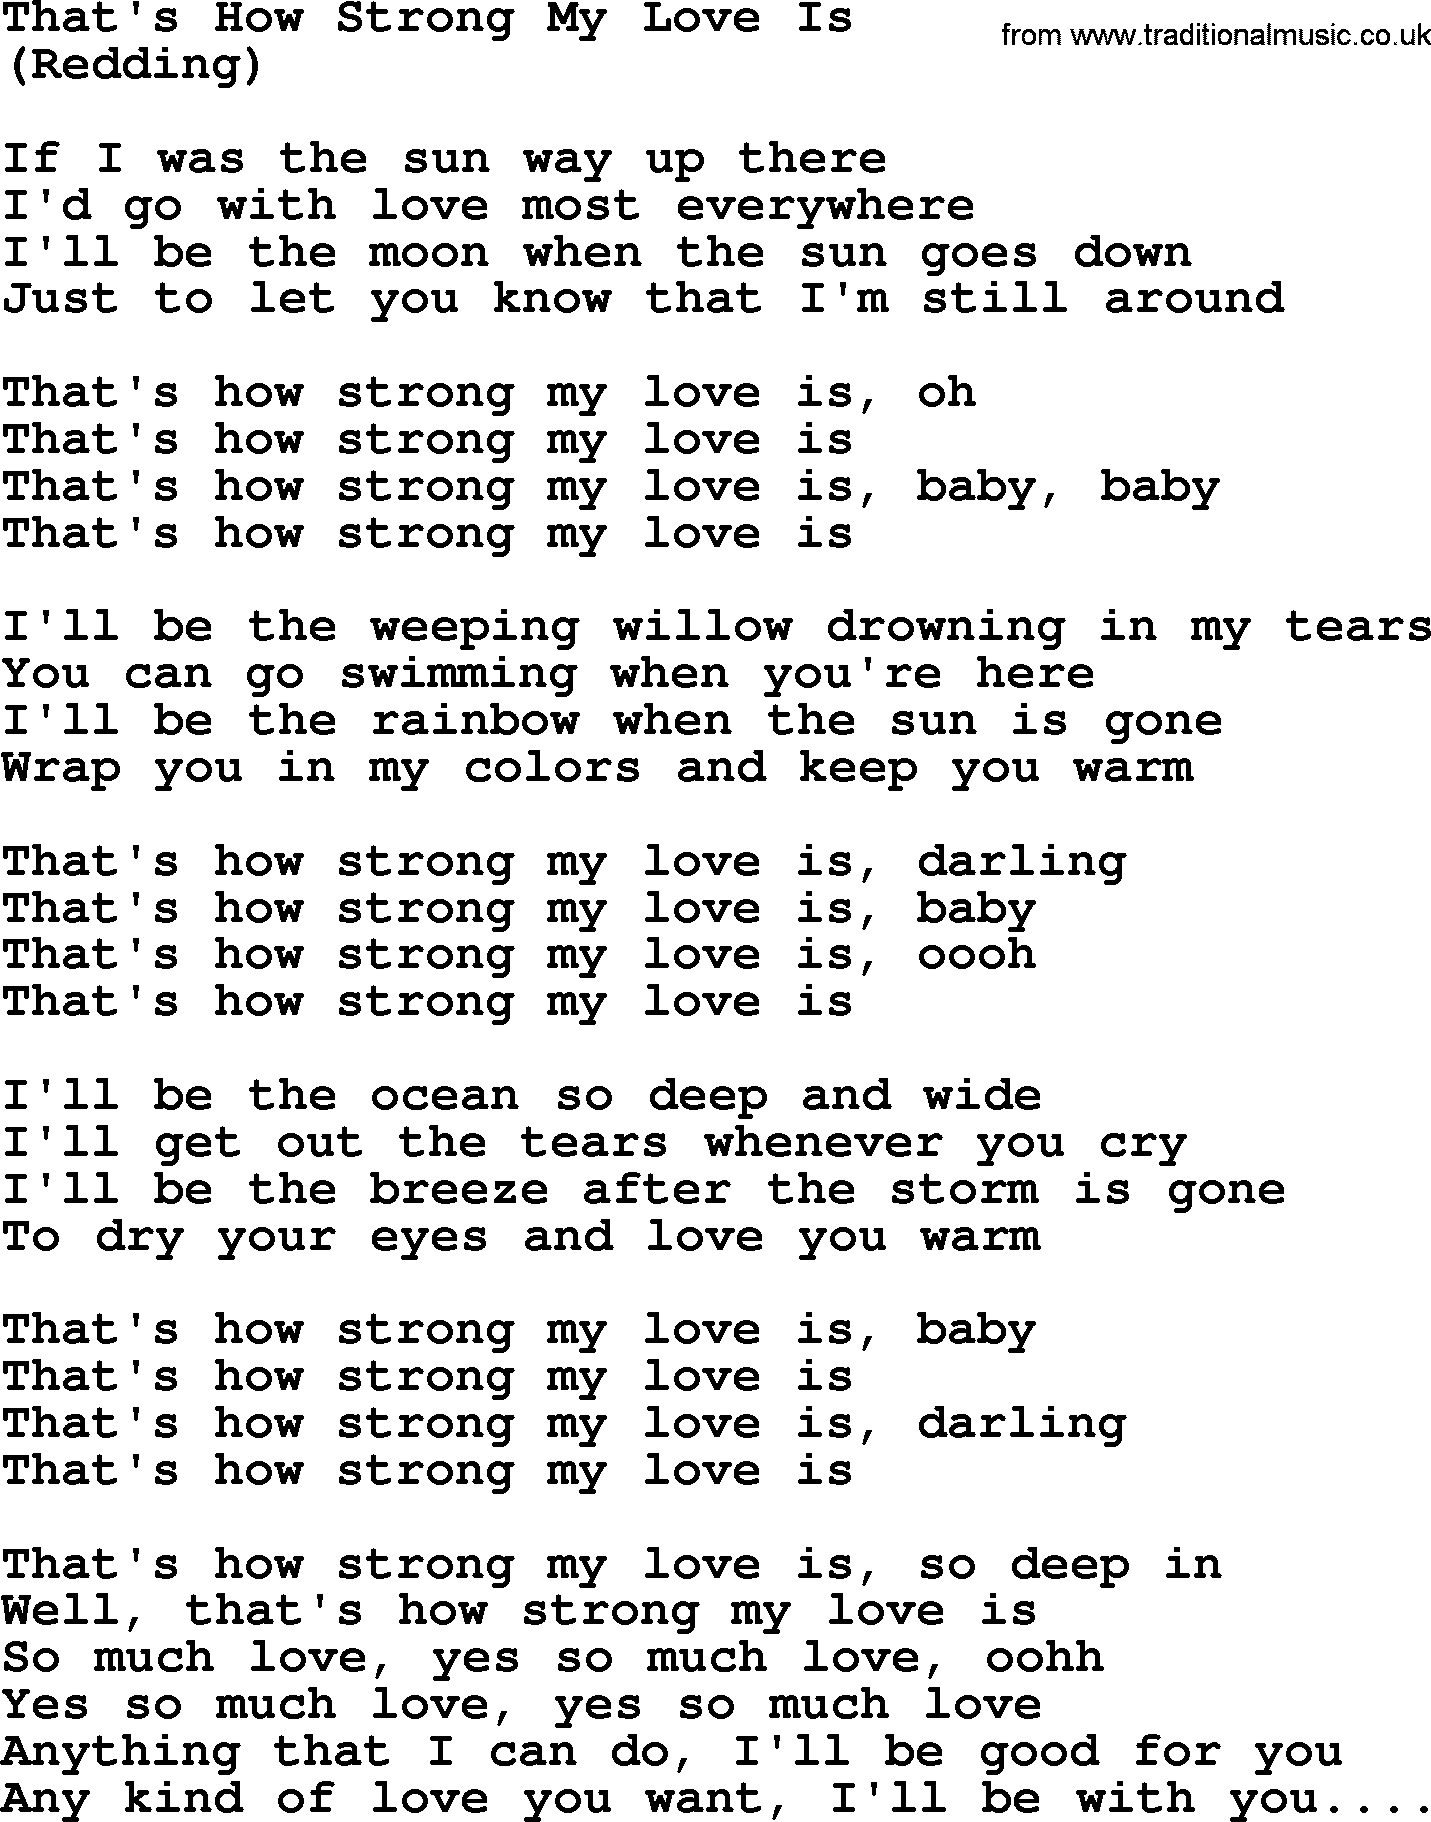 The Byrds song That's How Strong My Love Is, lyrics